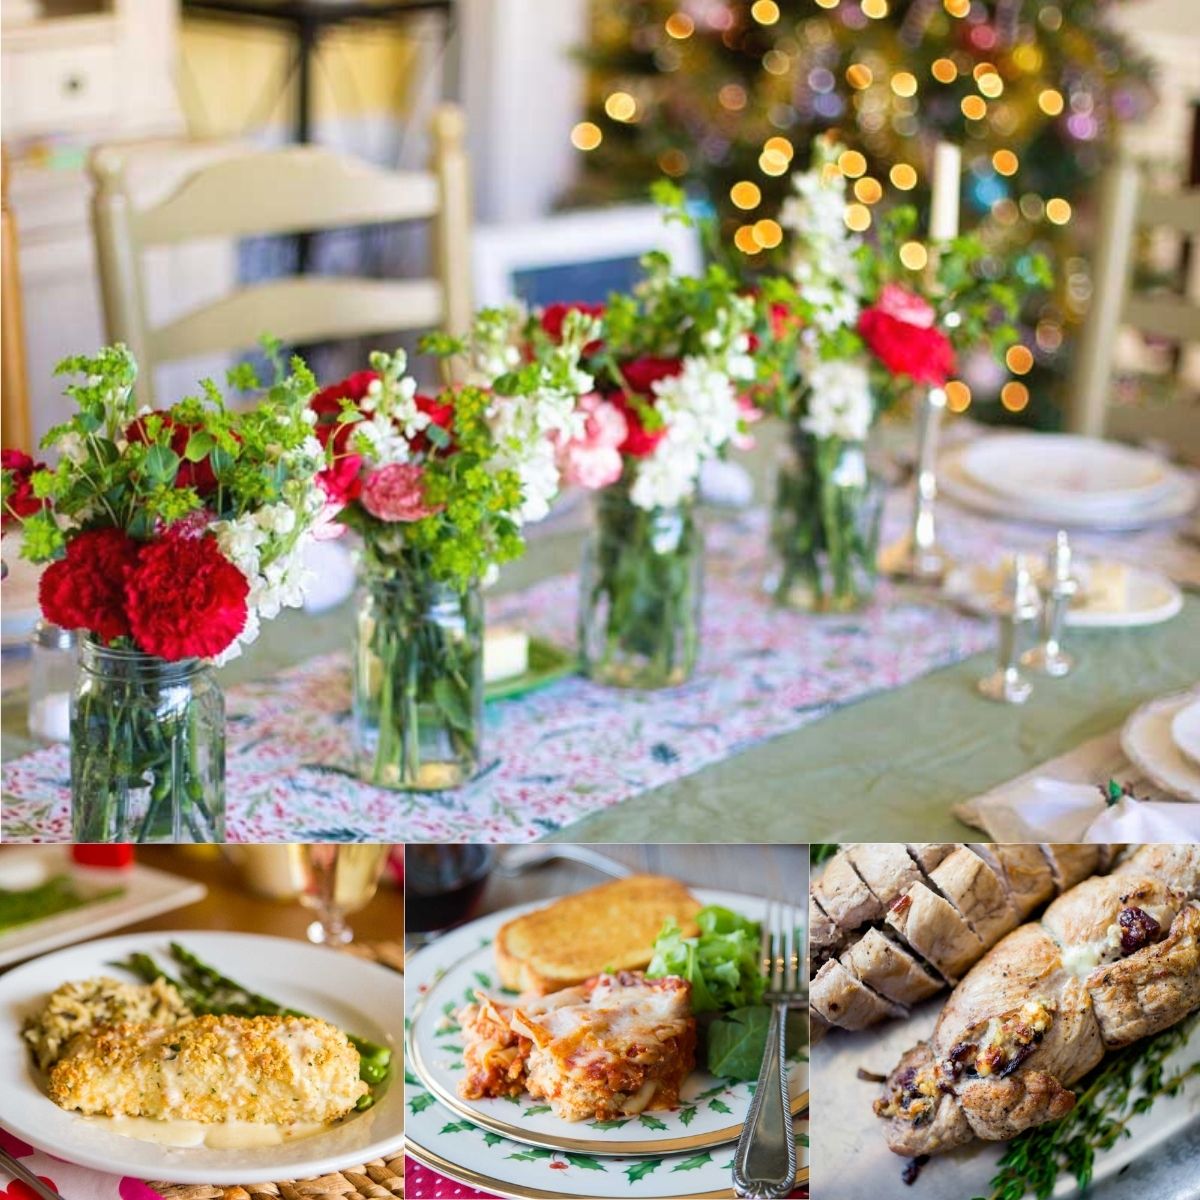 A family table is set with fresh flowers for Christmas dinner, a Christmas tree twinkles in the background.